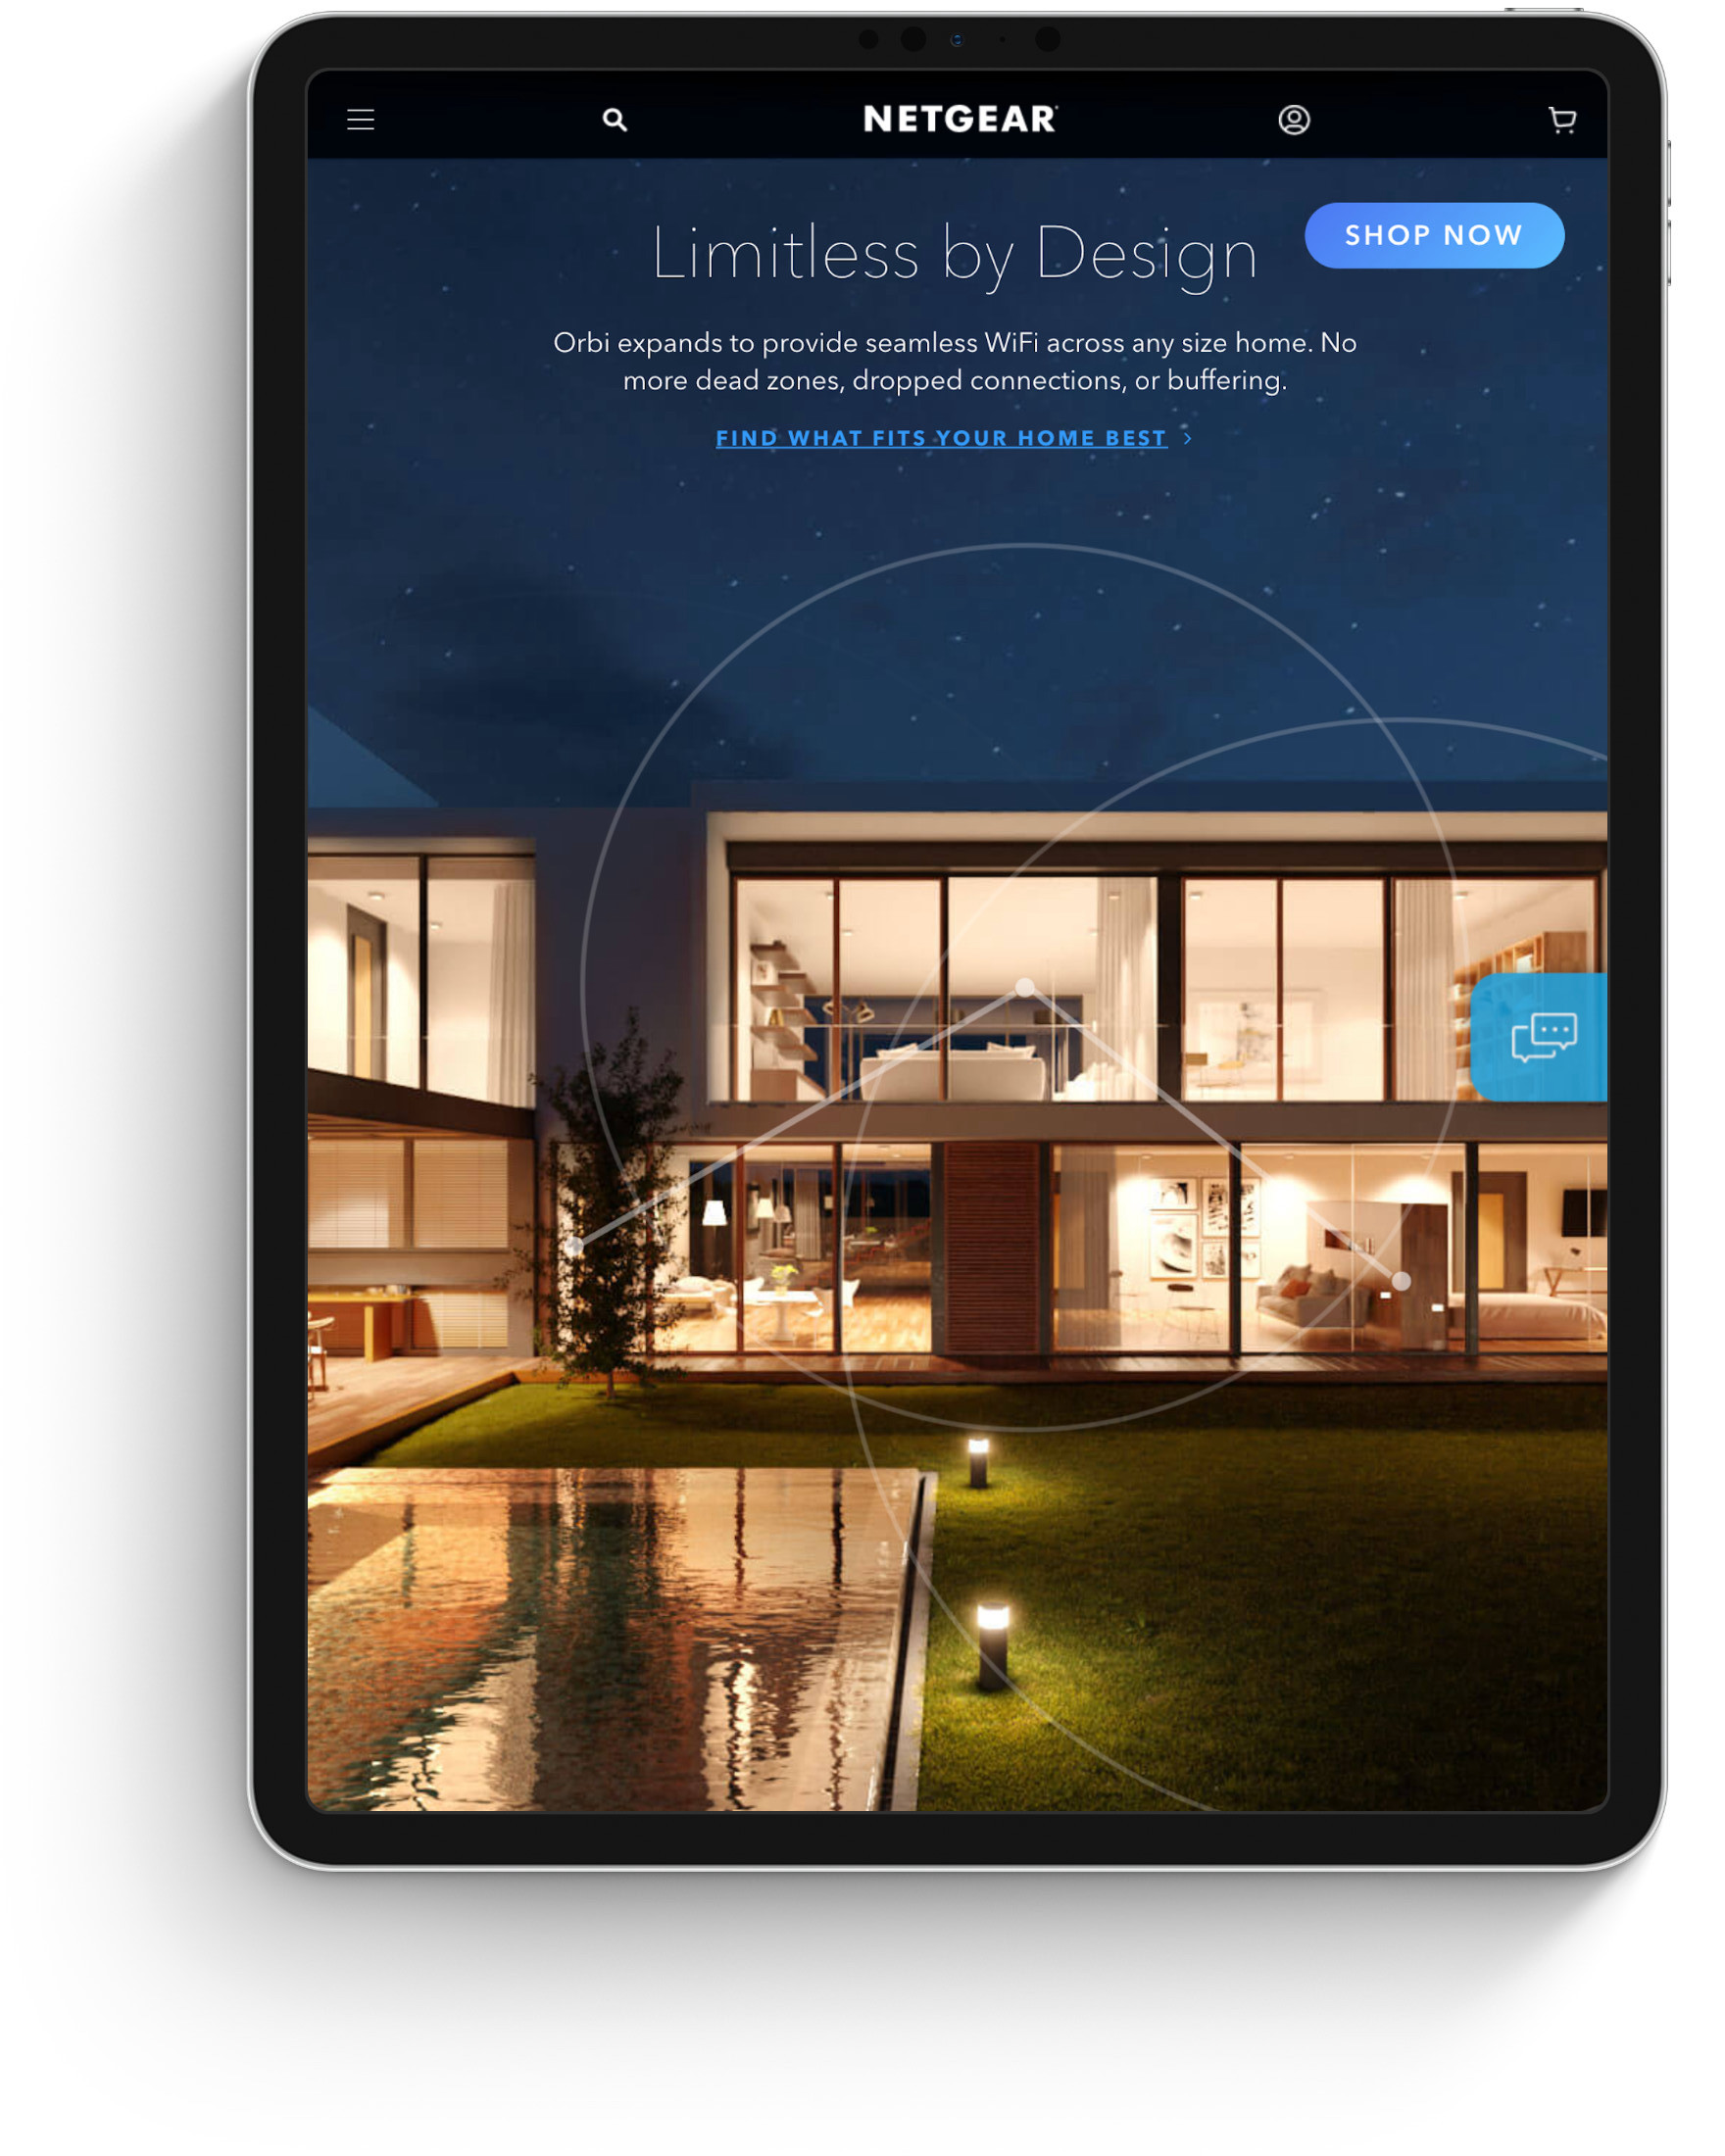 Ipad screen features a night view of a large 2-story solarium look over a swimming pool